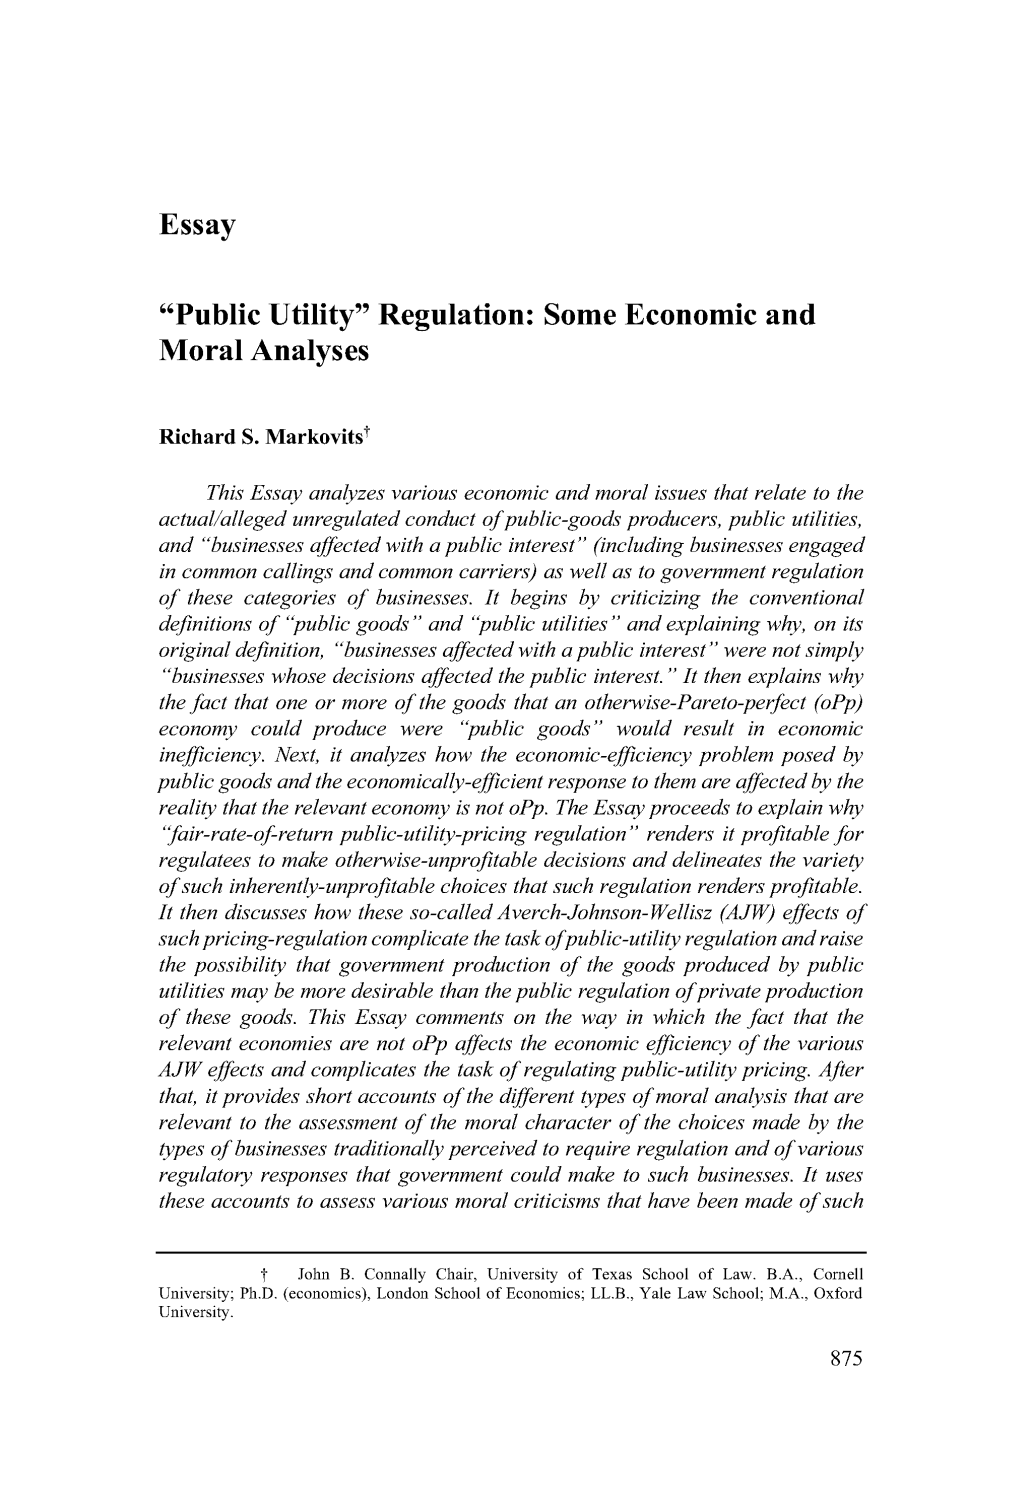 Essay "Public Utility" Regulation: Some Economic and Moral Analyses